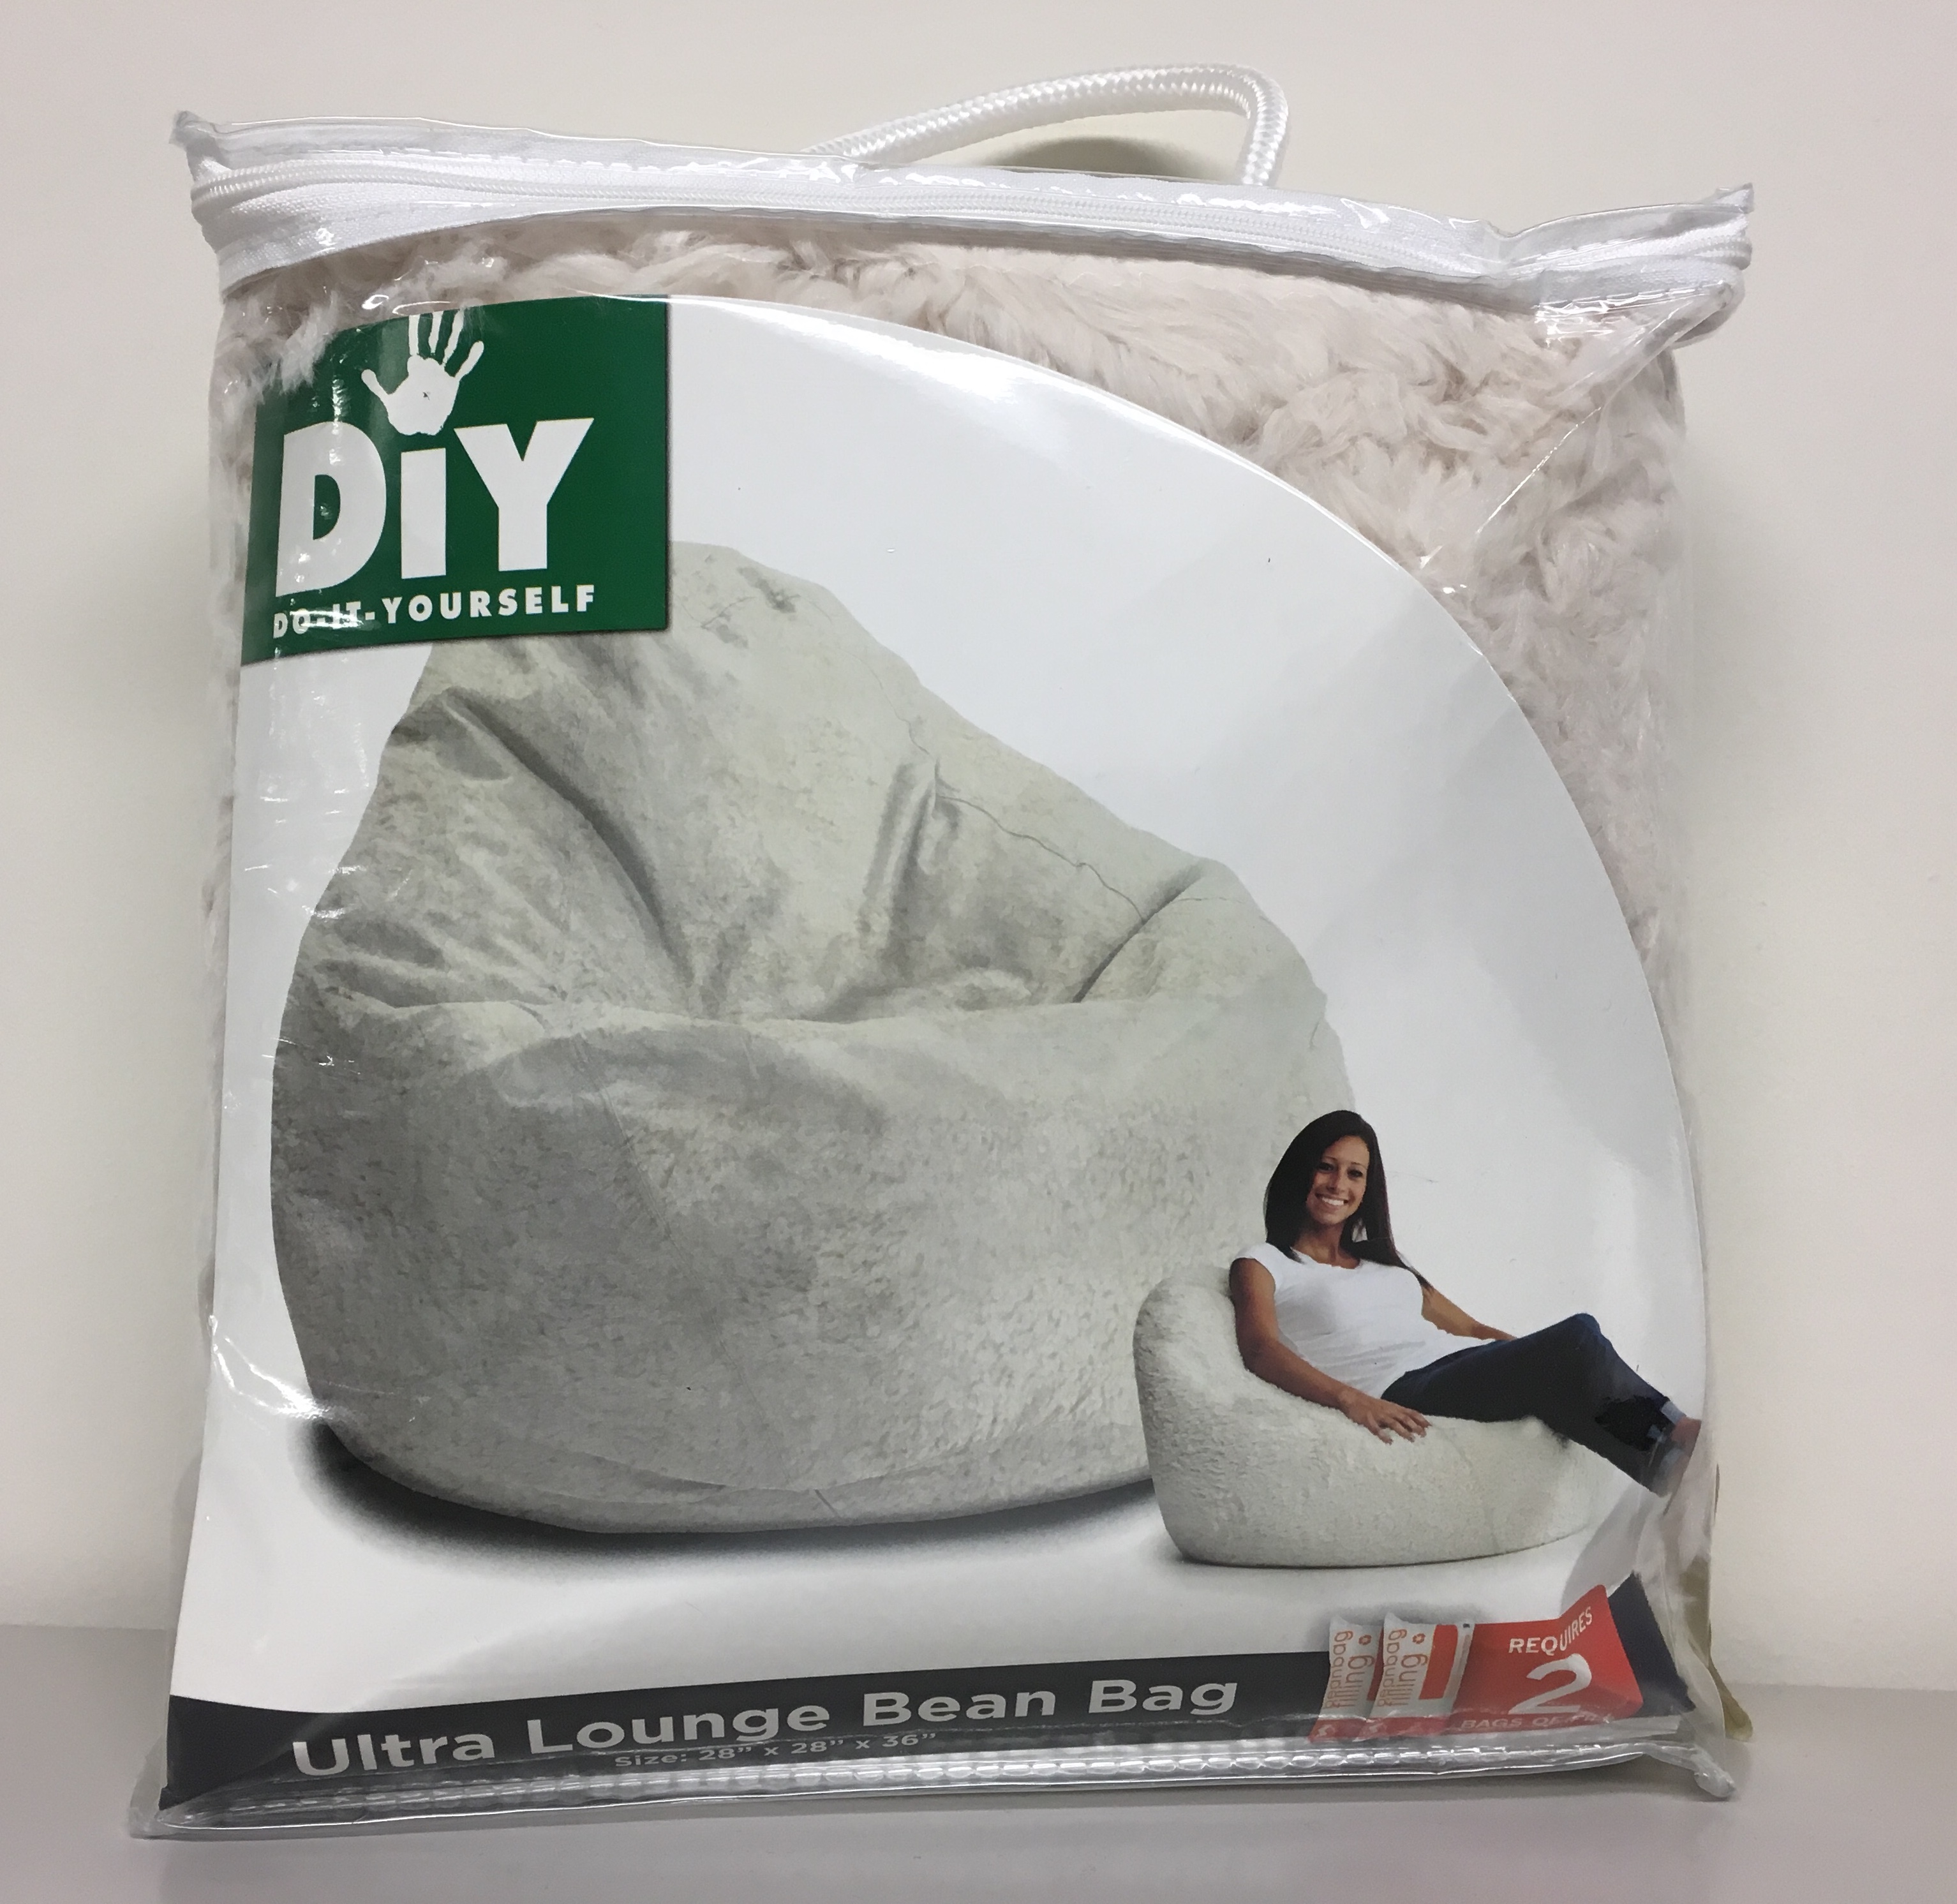 Comfort Research Recalls Bean Bag Chair Covers Due to ...